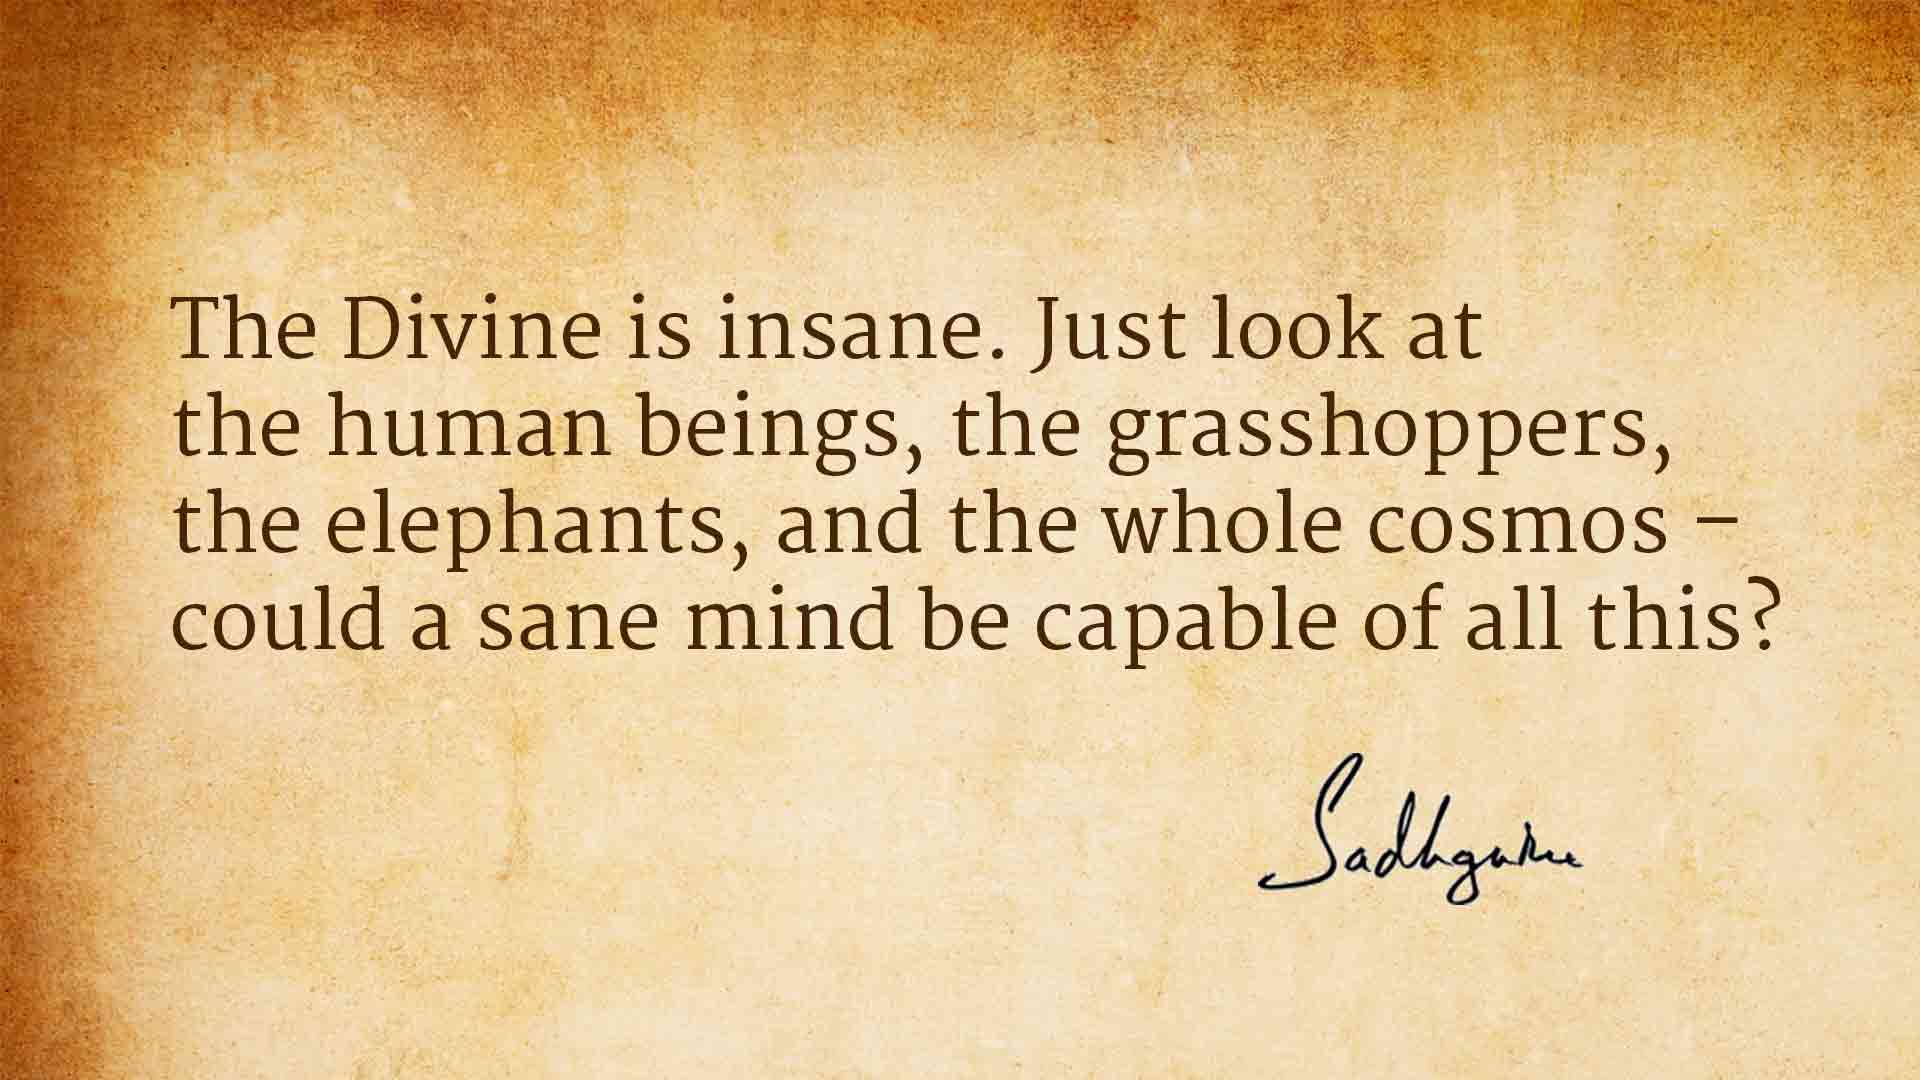 The Divine is insane. Just look at the human beings, the grasshoppers, the elephants, and the whole cosmos – could a sane mind be capable of all this1